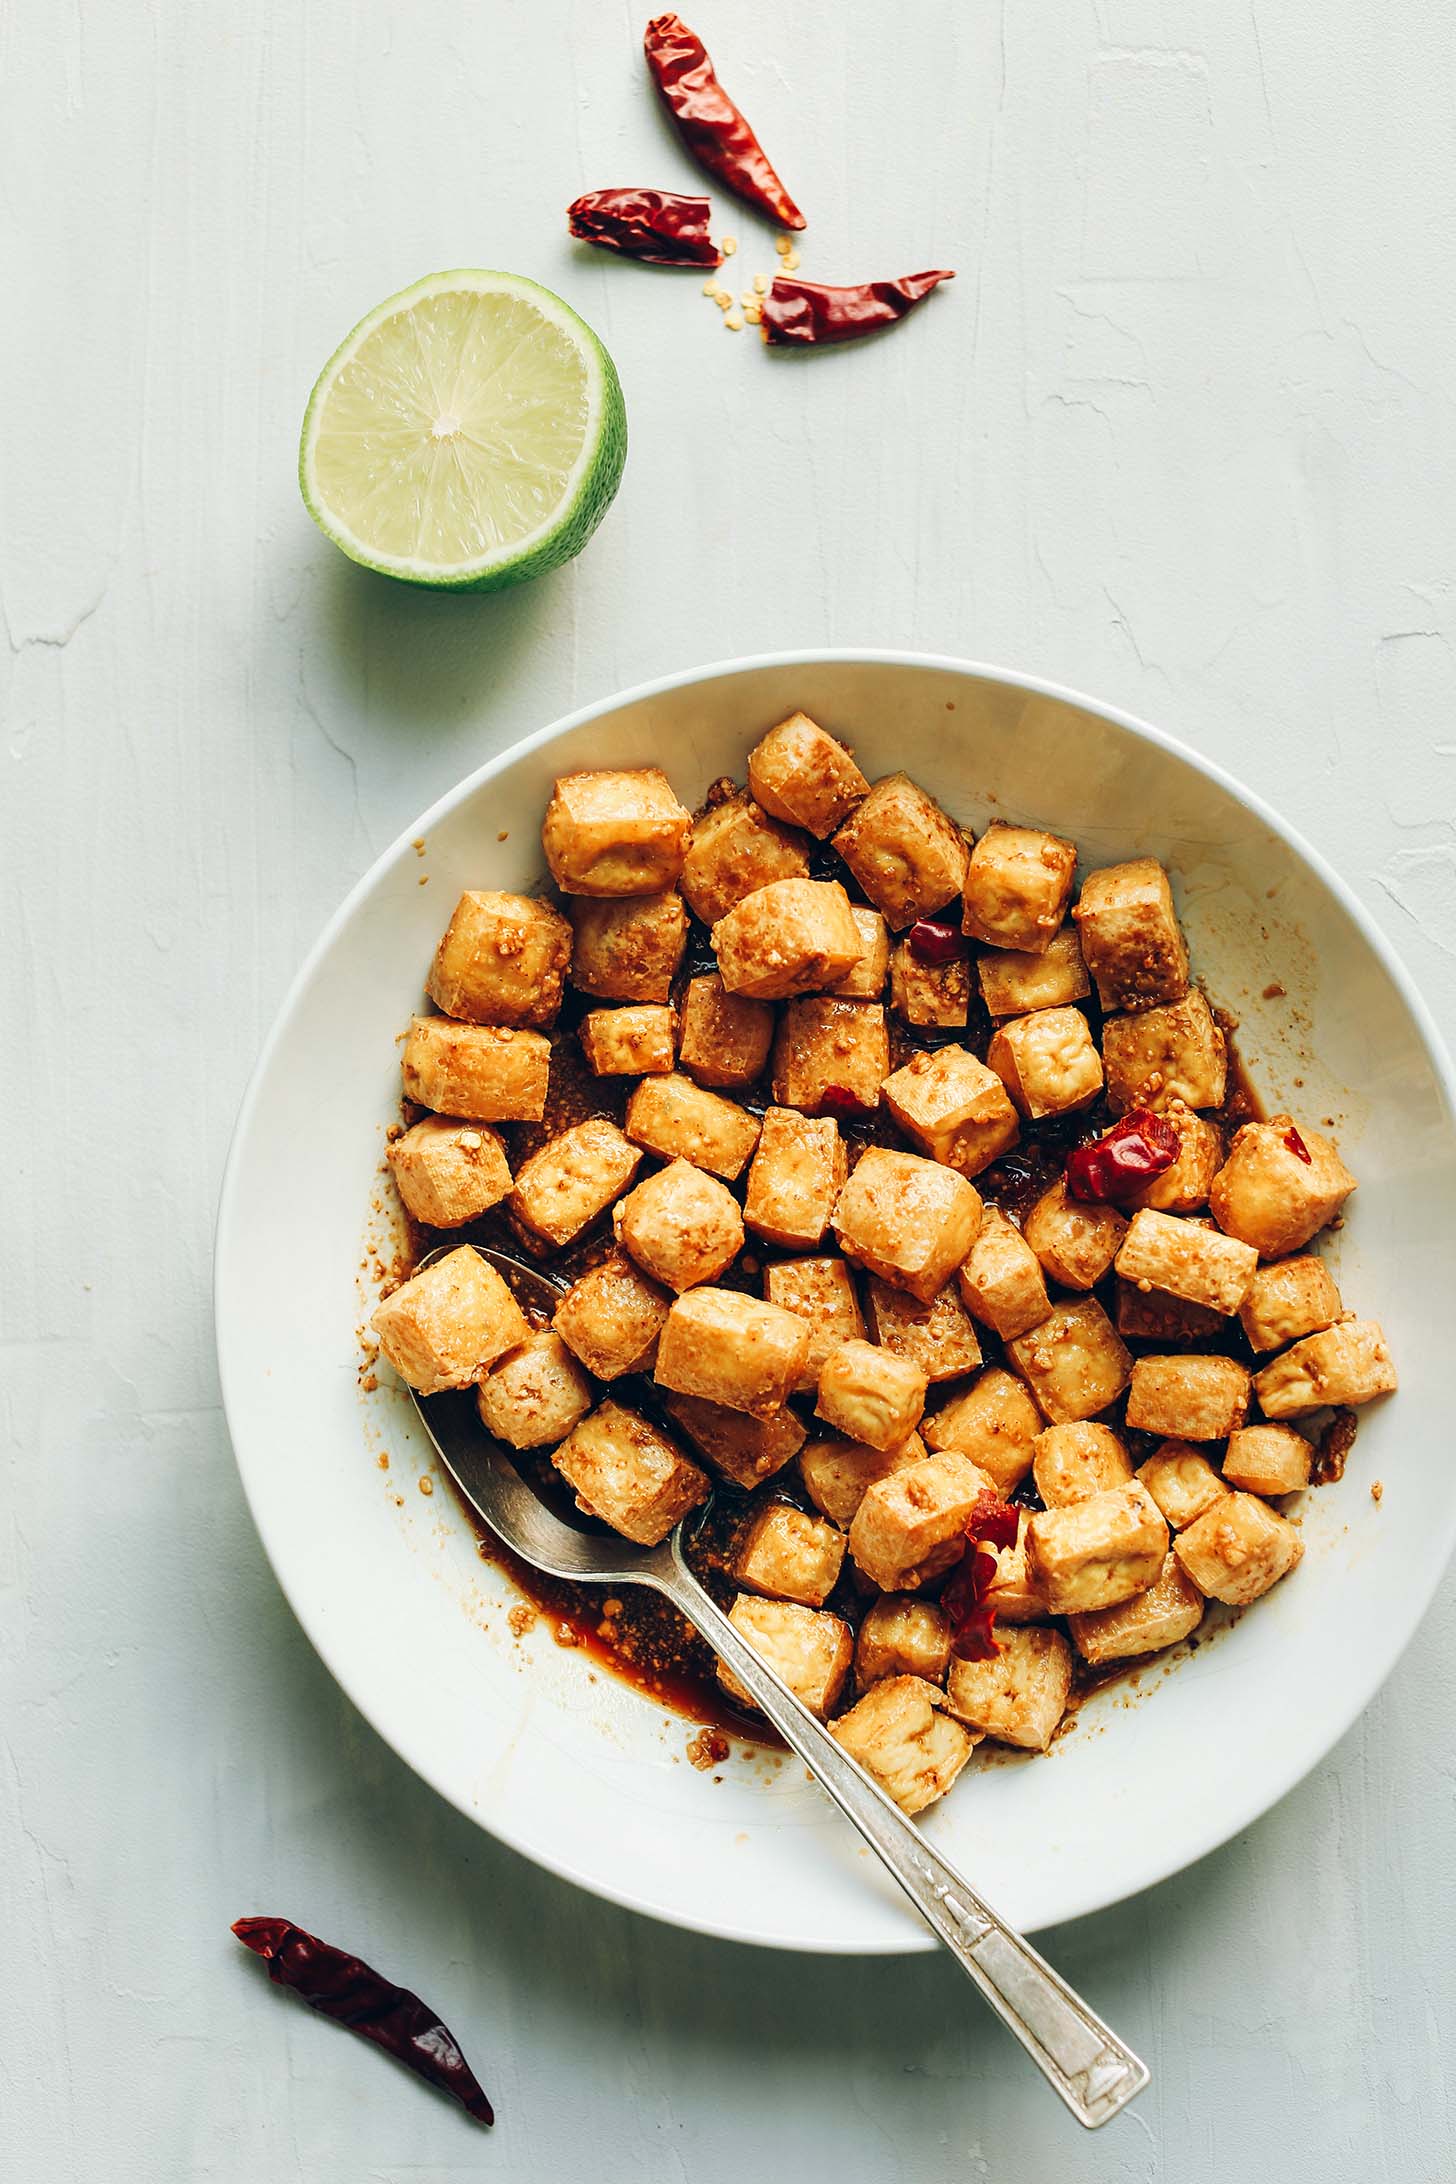 Marinating cubes of tofu for Almond Butter Tofu Stir-Fry